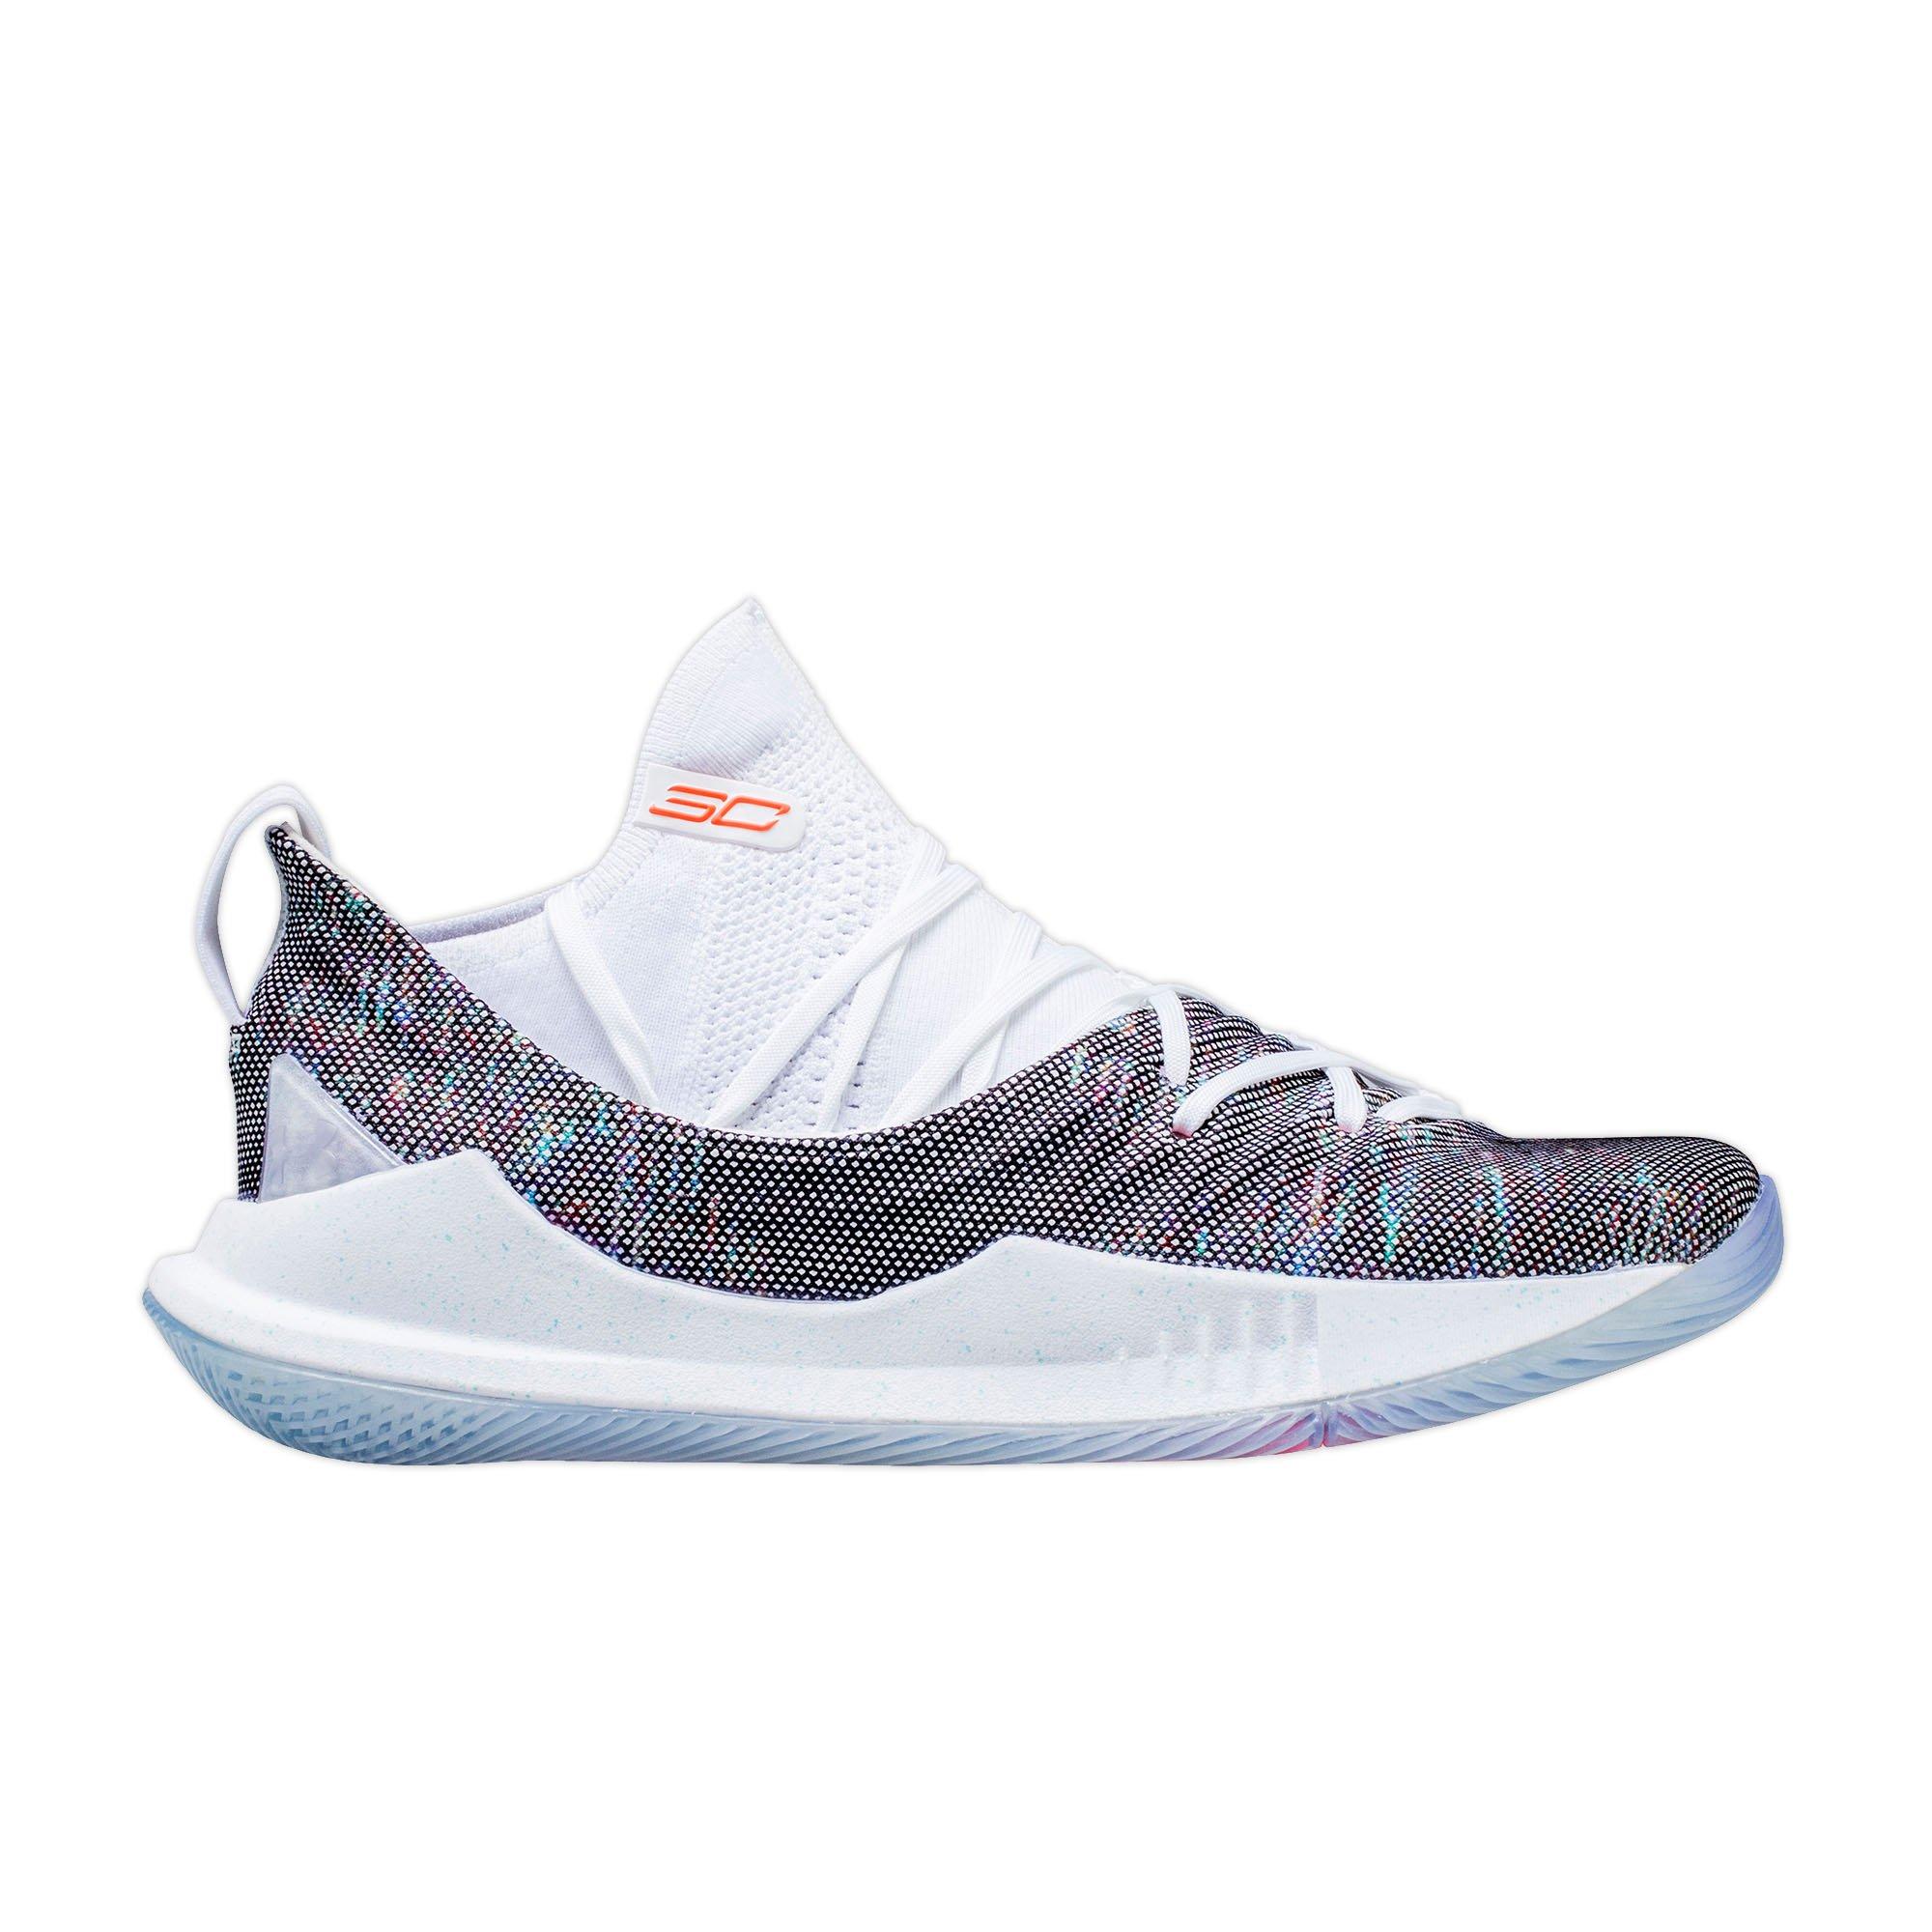 mens curry 5